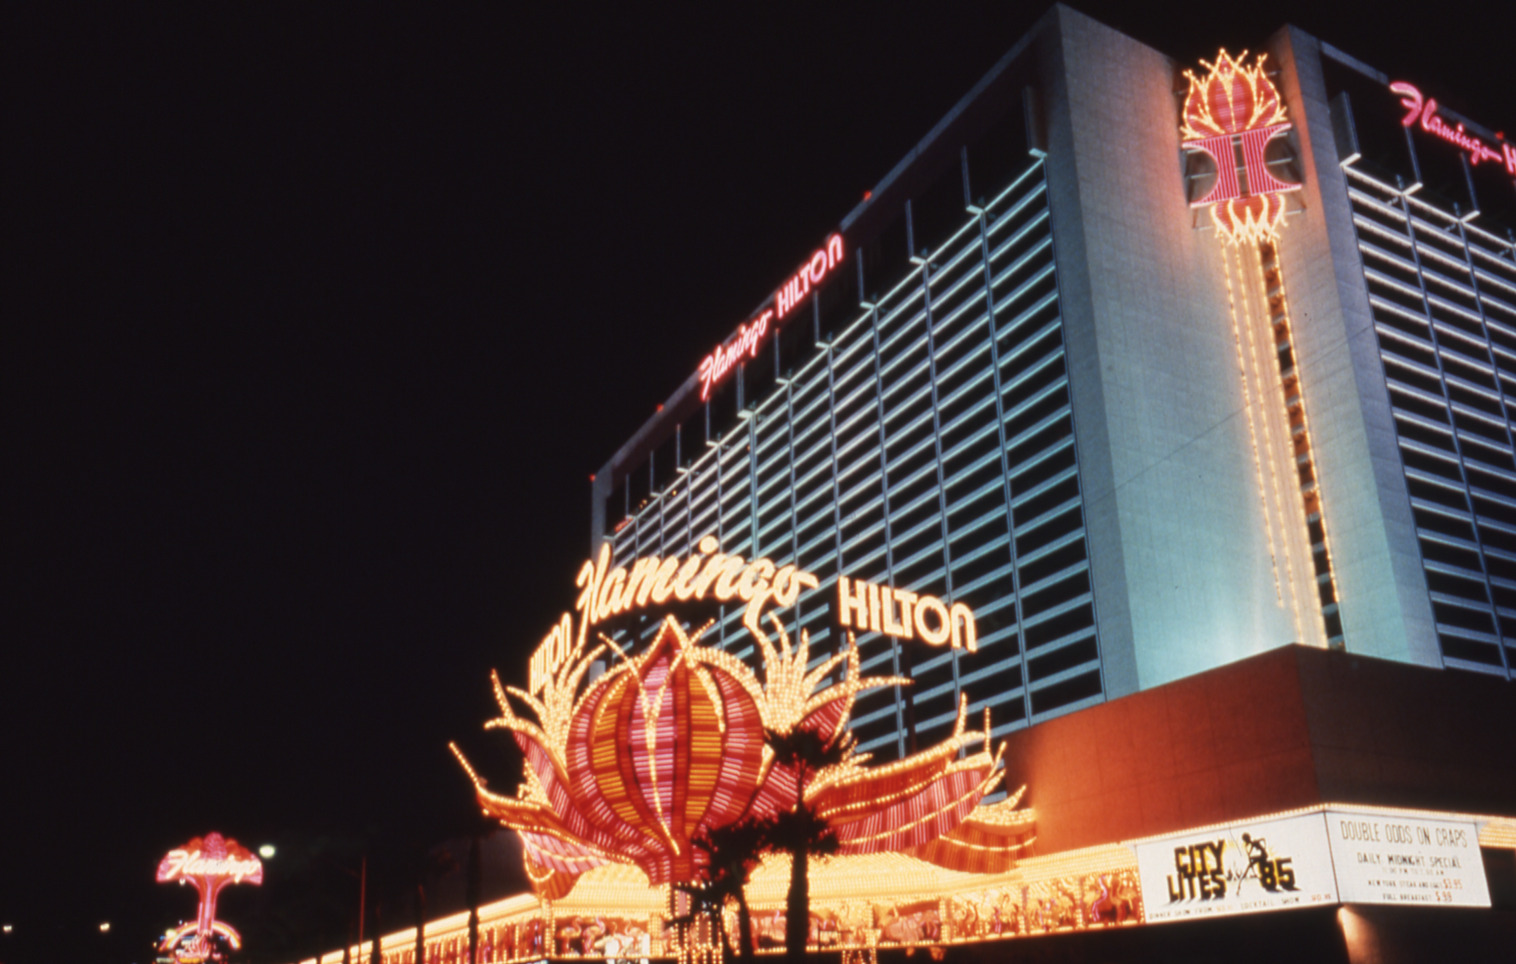 The Flamingo Hilton Hotel & Casino lettering, marquee, roof mounted, and wall signs, Las Vegas, Nevada: photographic print